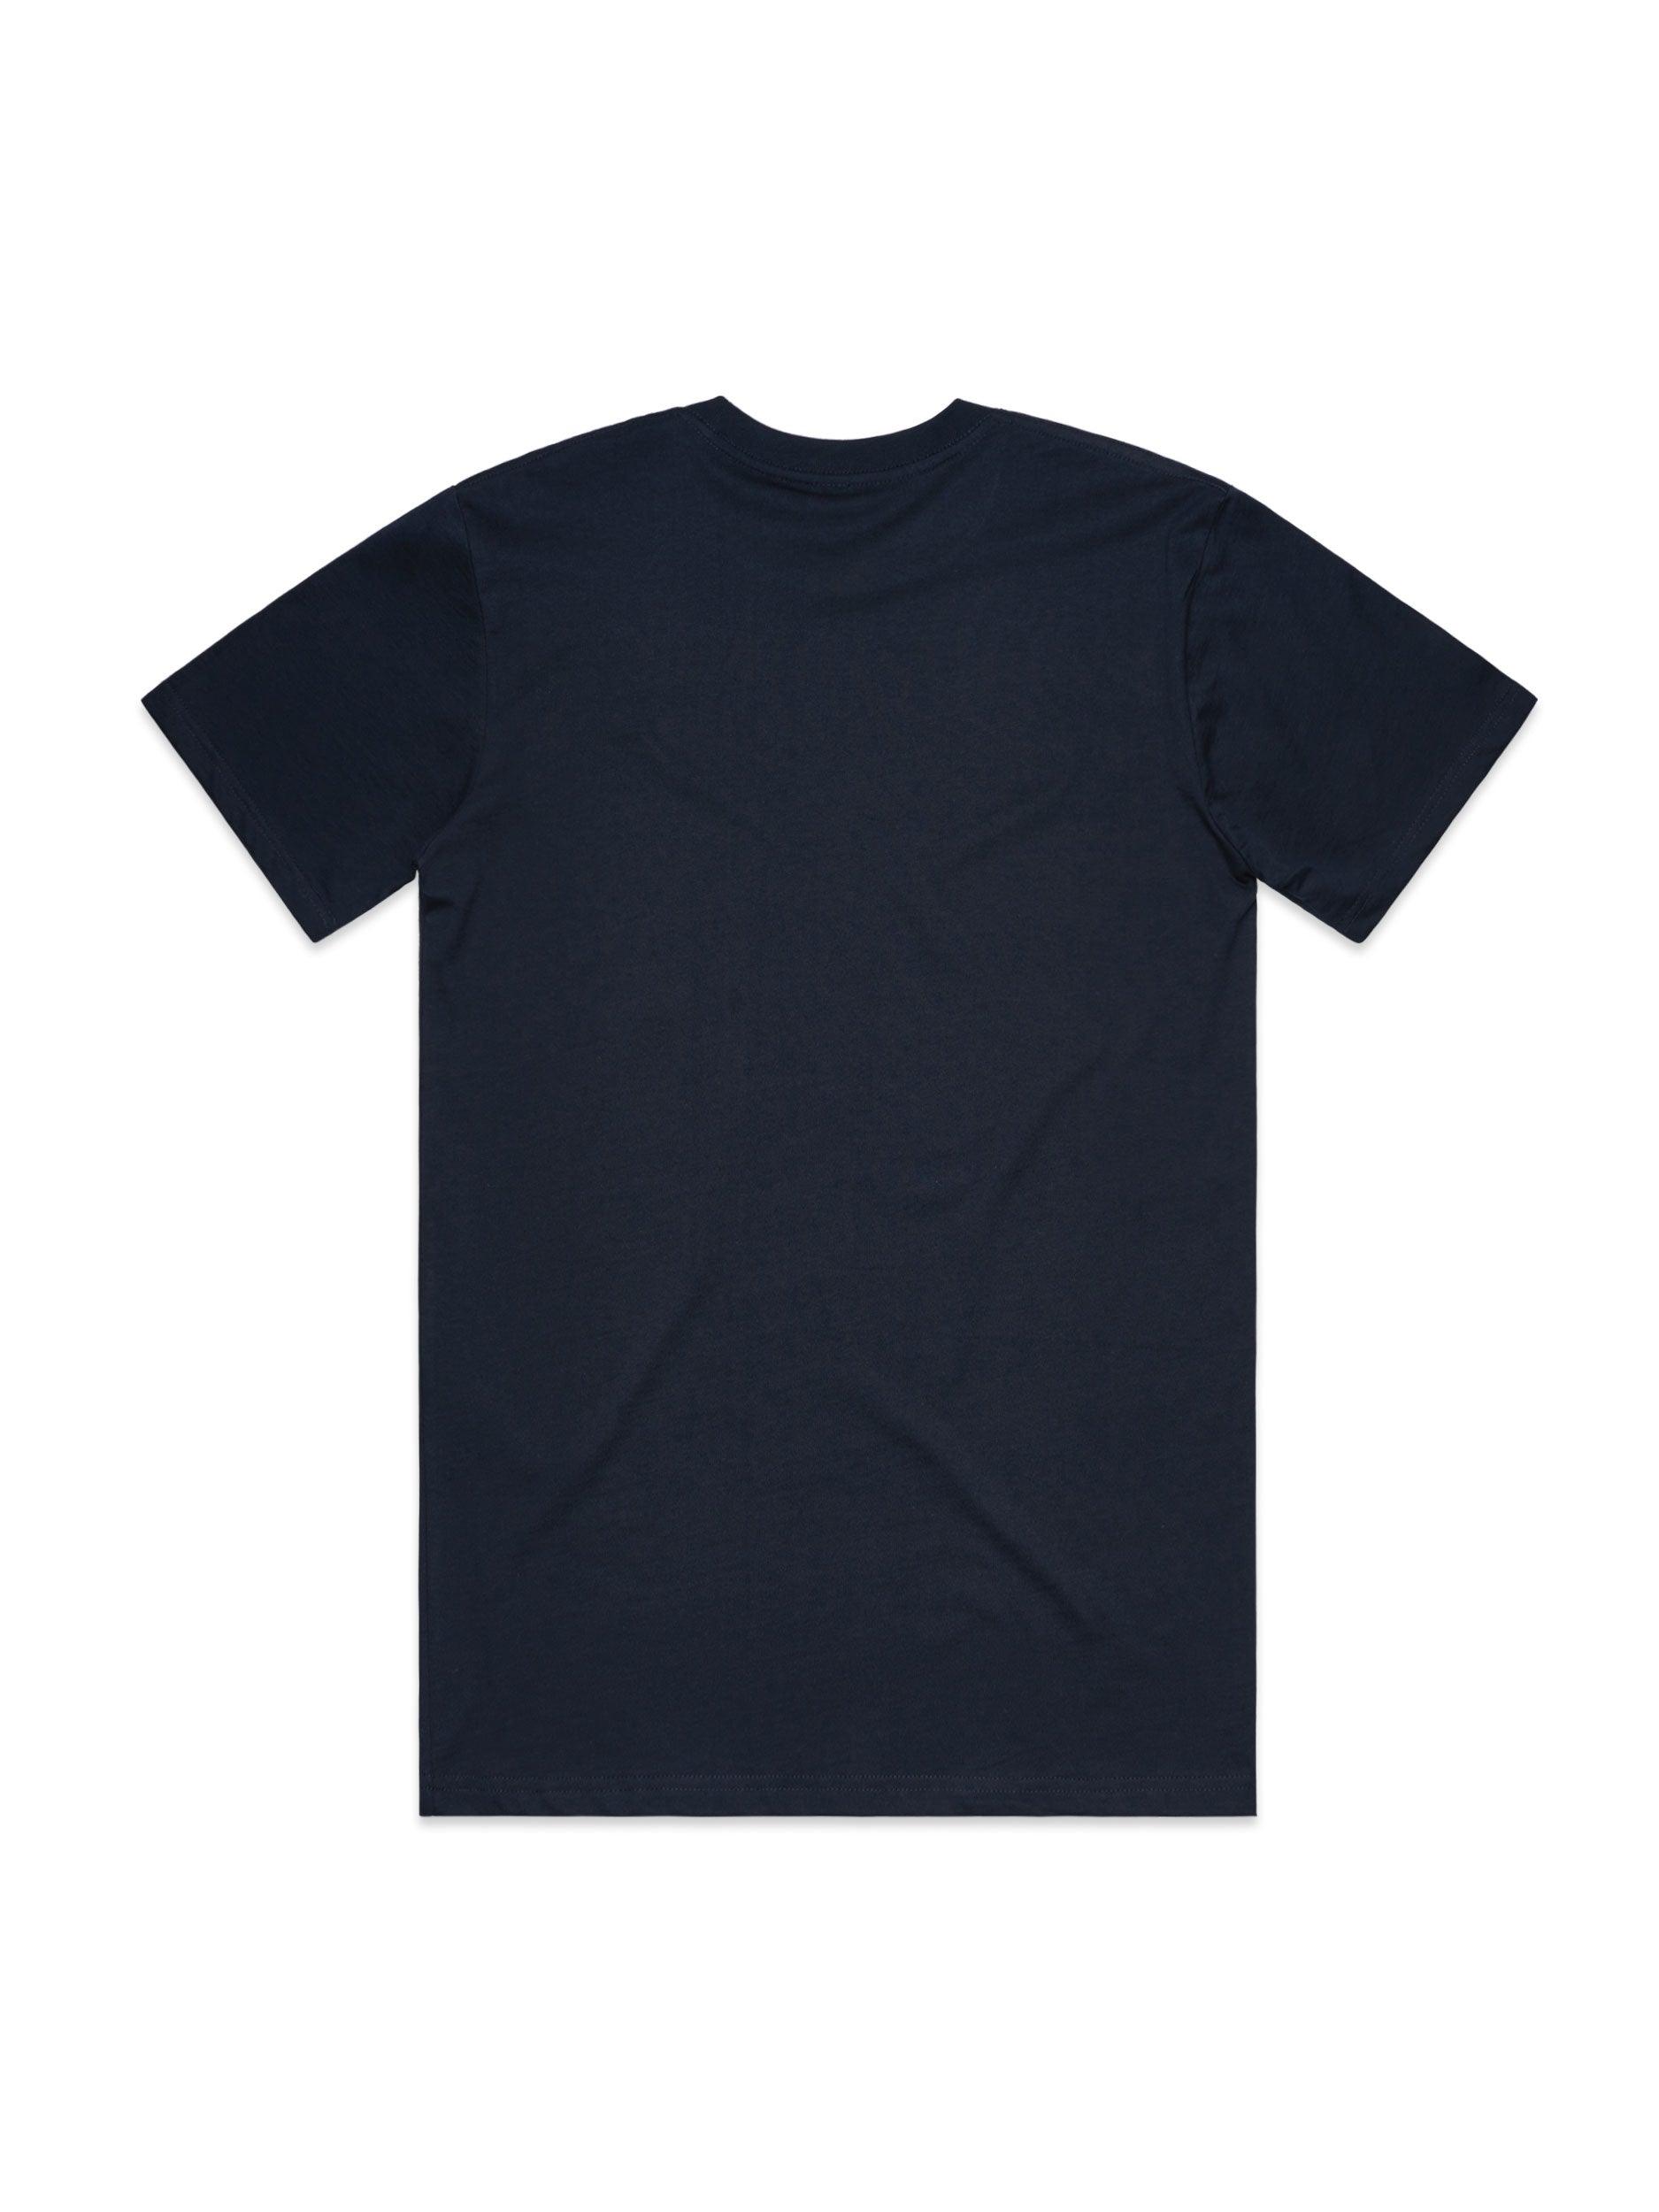 Black Sparrow T-Shirt - Watershed Brand